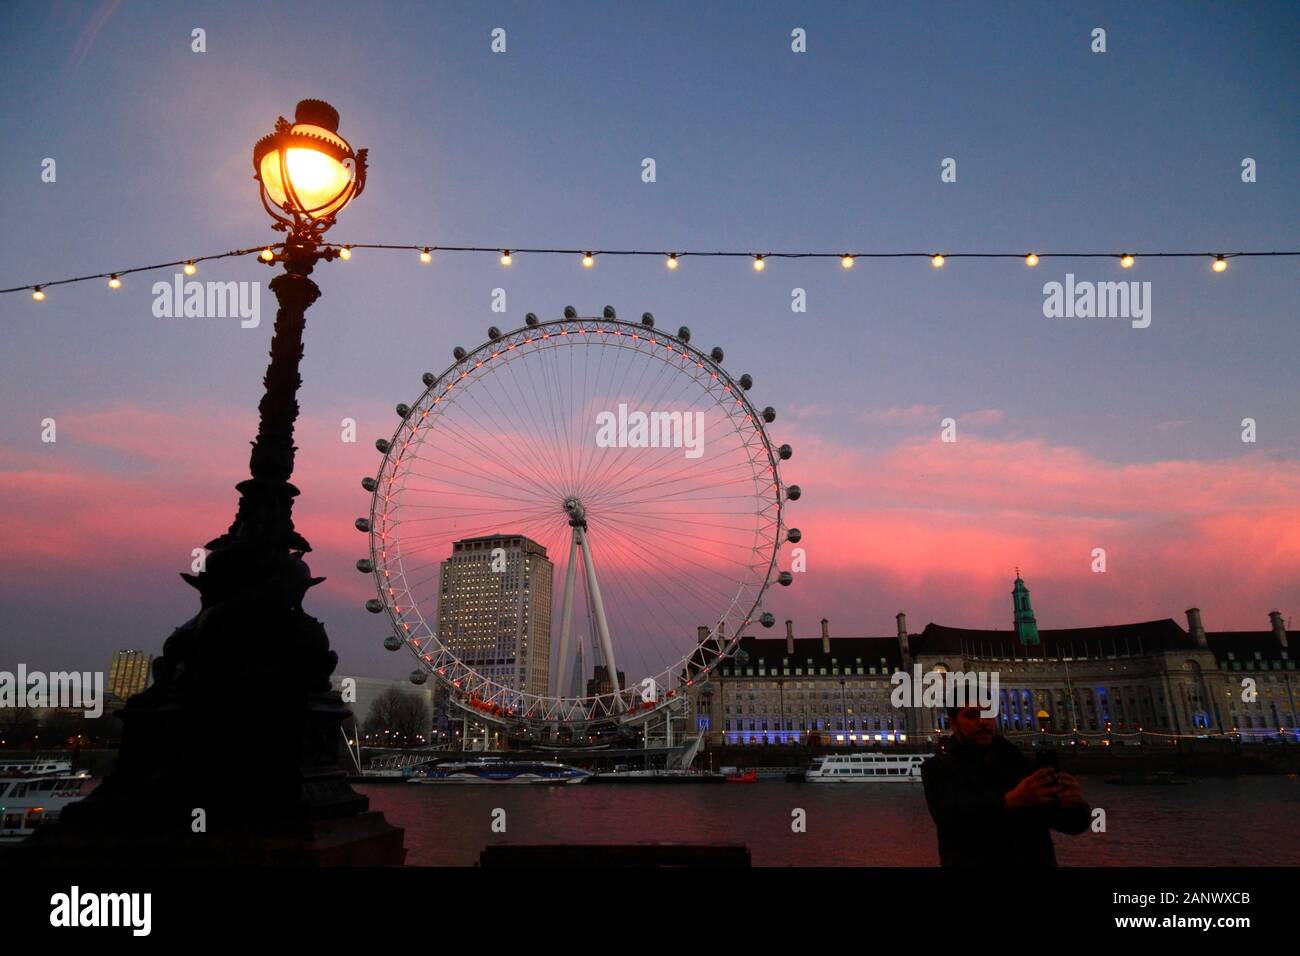 Man taking selfie with London Eye, Shell Centre building and County Hall at sunset, London, England Stock Photo